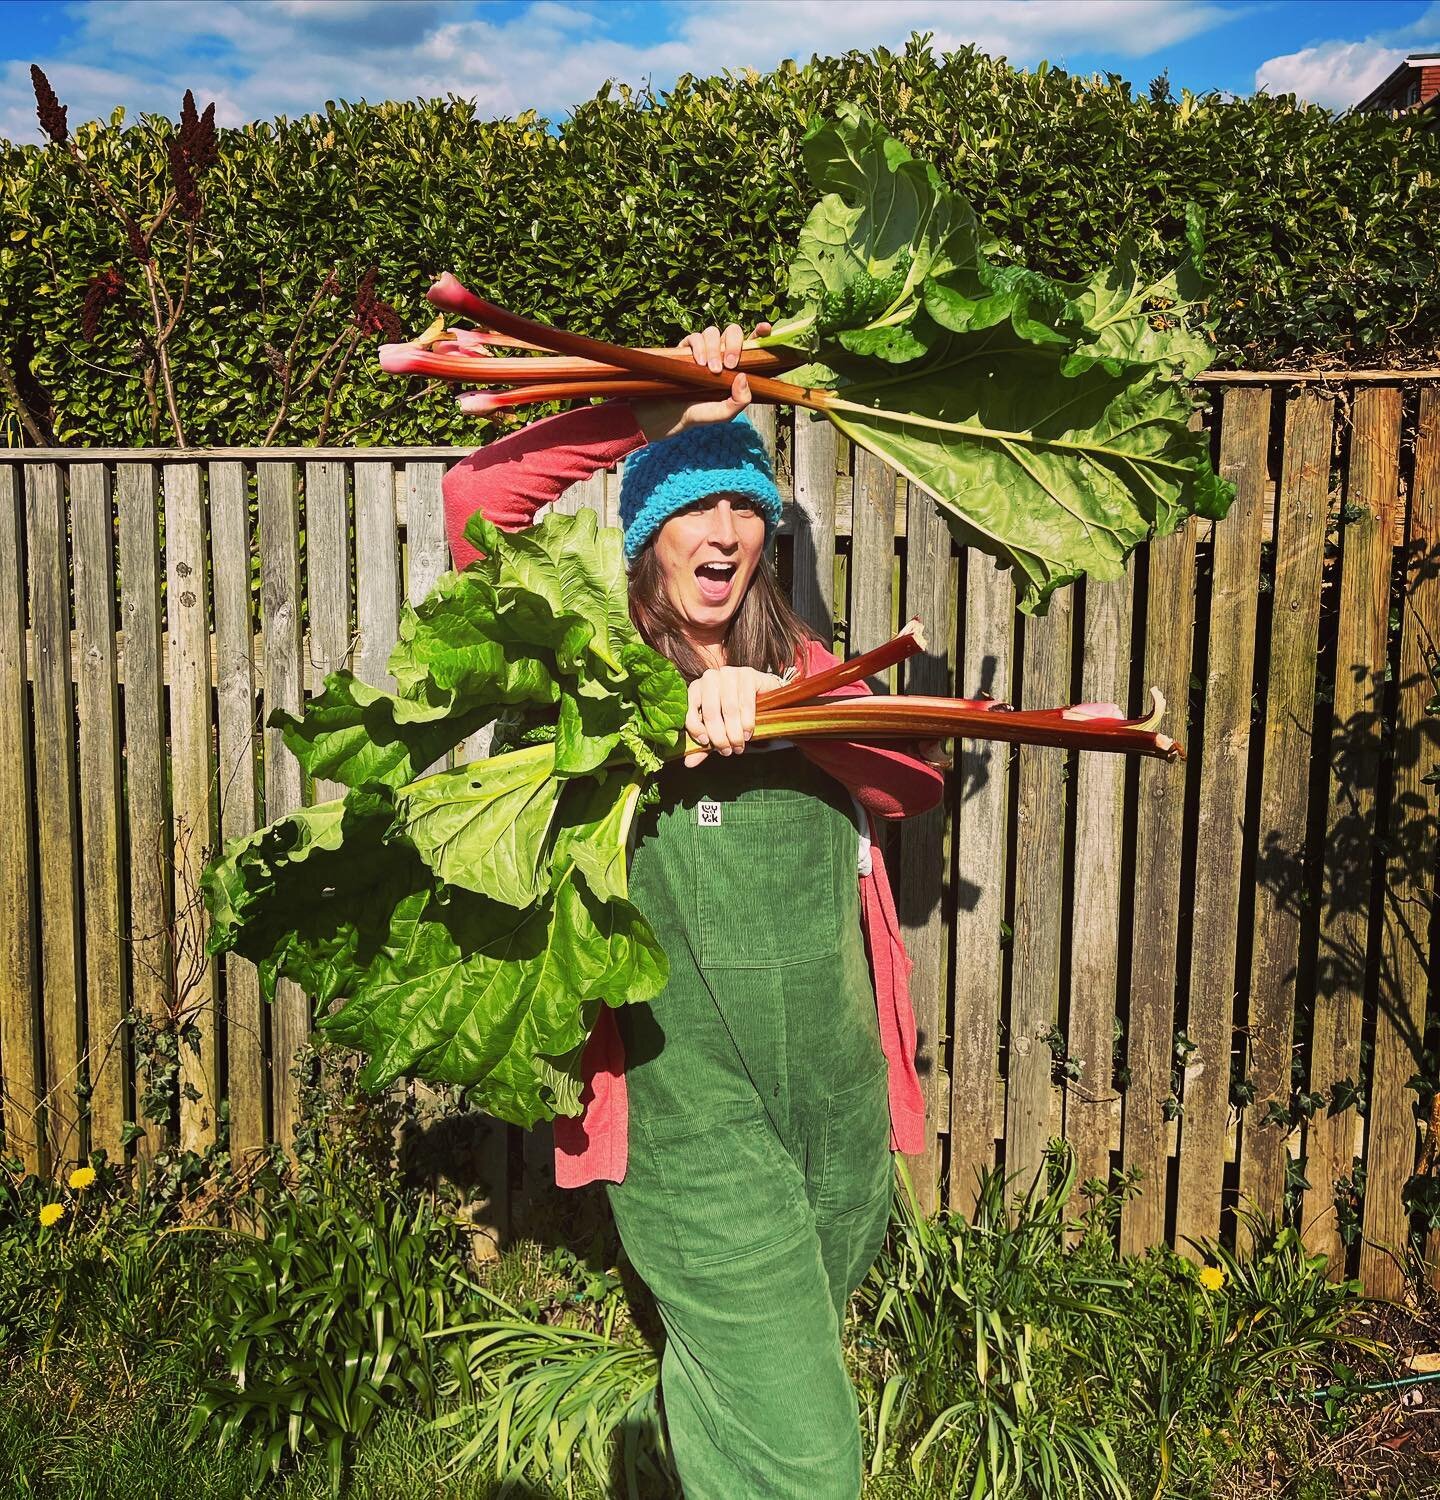 When you accidentally dress to match your rhubarb! 🌱🌱🌱 🤣

#rhubarb #homegrown #homegrownveggies #homegrownfood #rhubarbcrumble #rhubarbcake #gardening #growyourown #growyourownfood #coordinated #colorcombination #crumble #cake #familygarden #allo